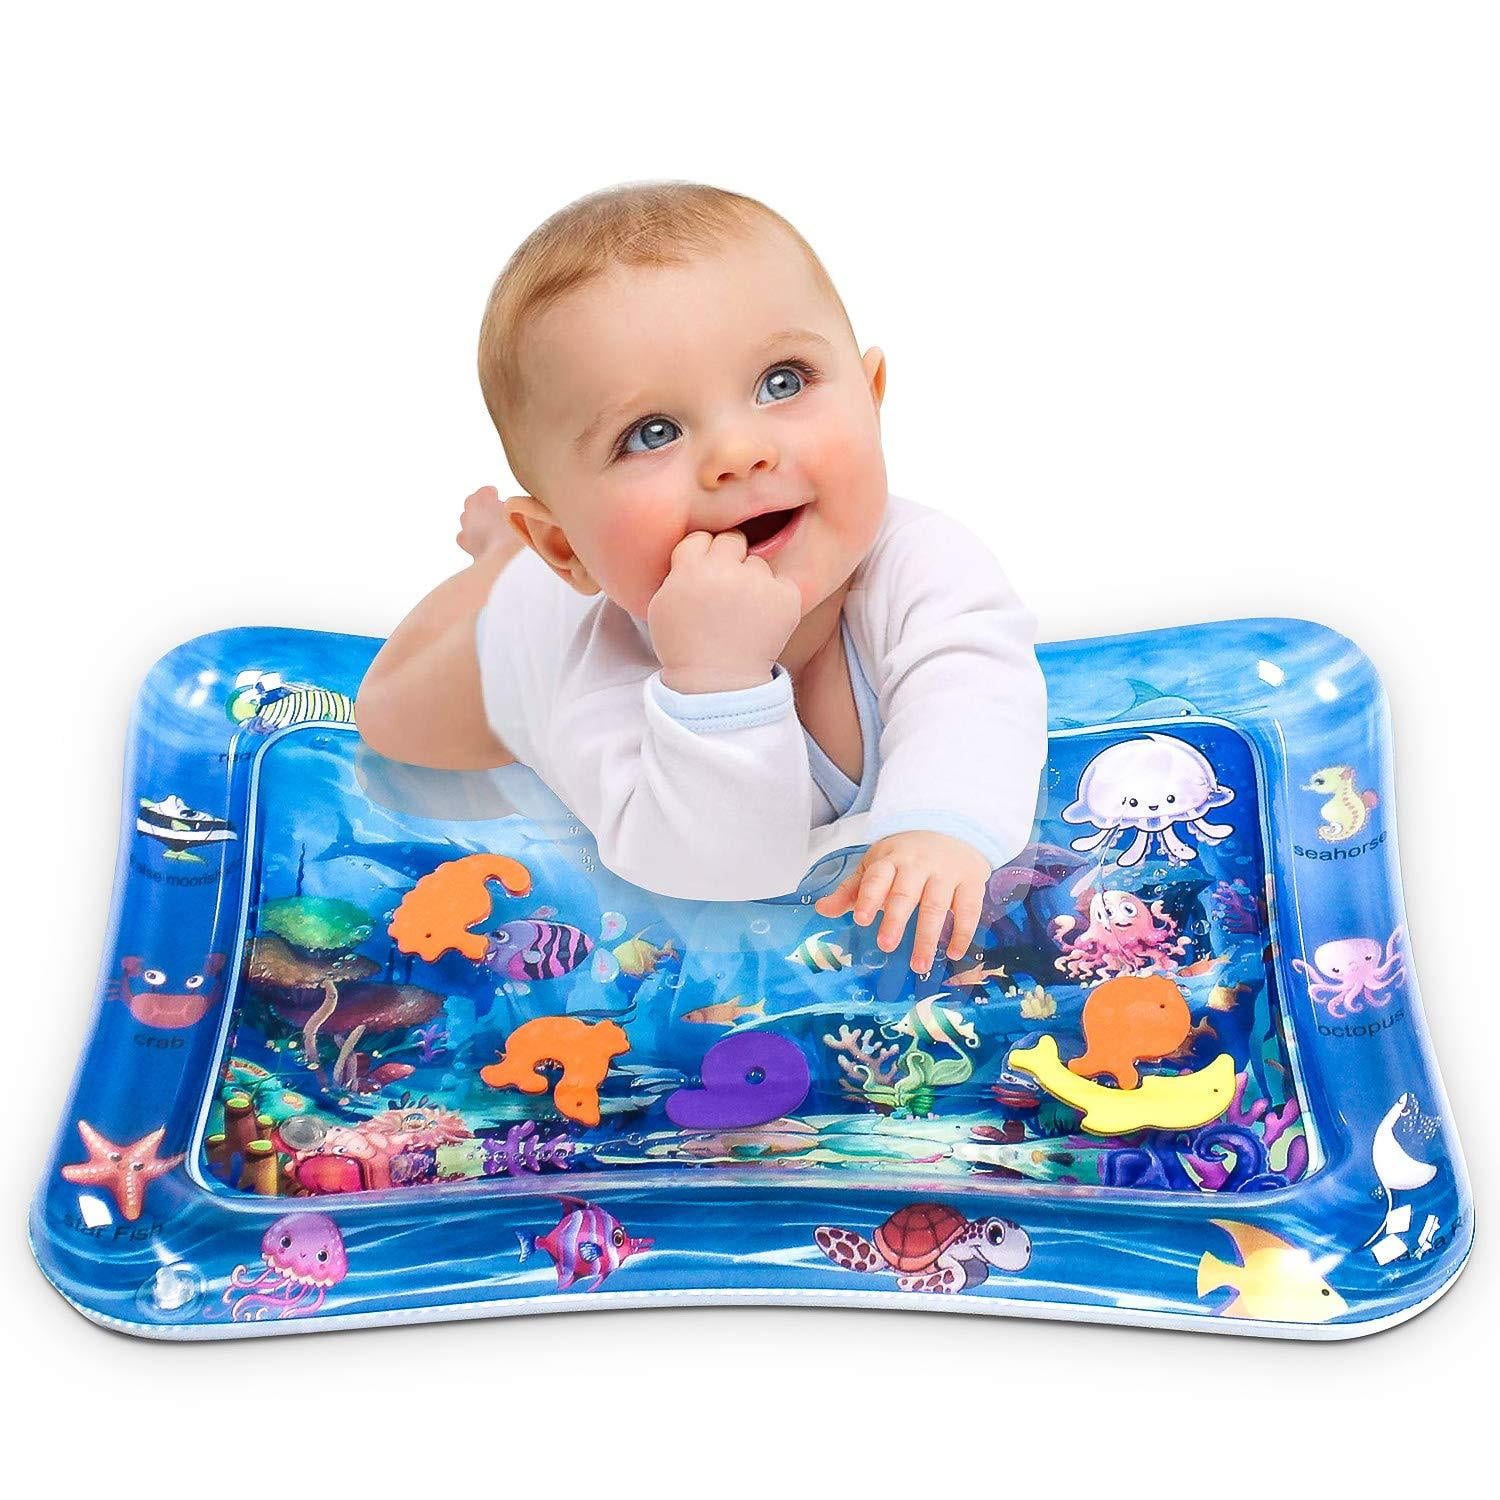 Y Baby Water Play Mat Inflatable Tummy Time Dr Leakproof Odor Free 26 Inches, Smooth Edges Thick Strong PVC Top Durability Quality Beautiful Graphics 